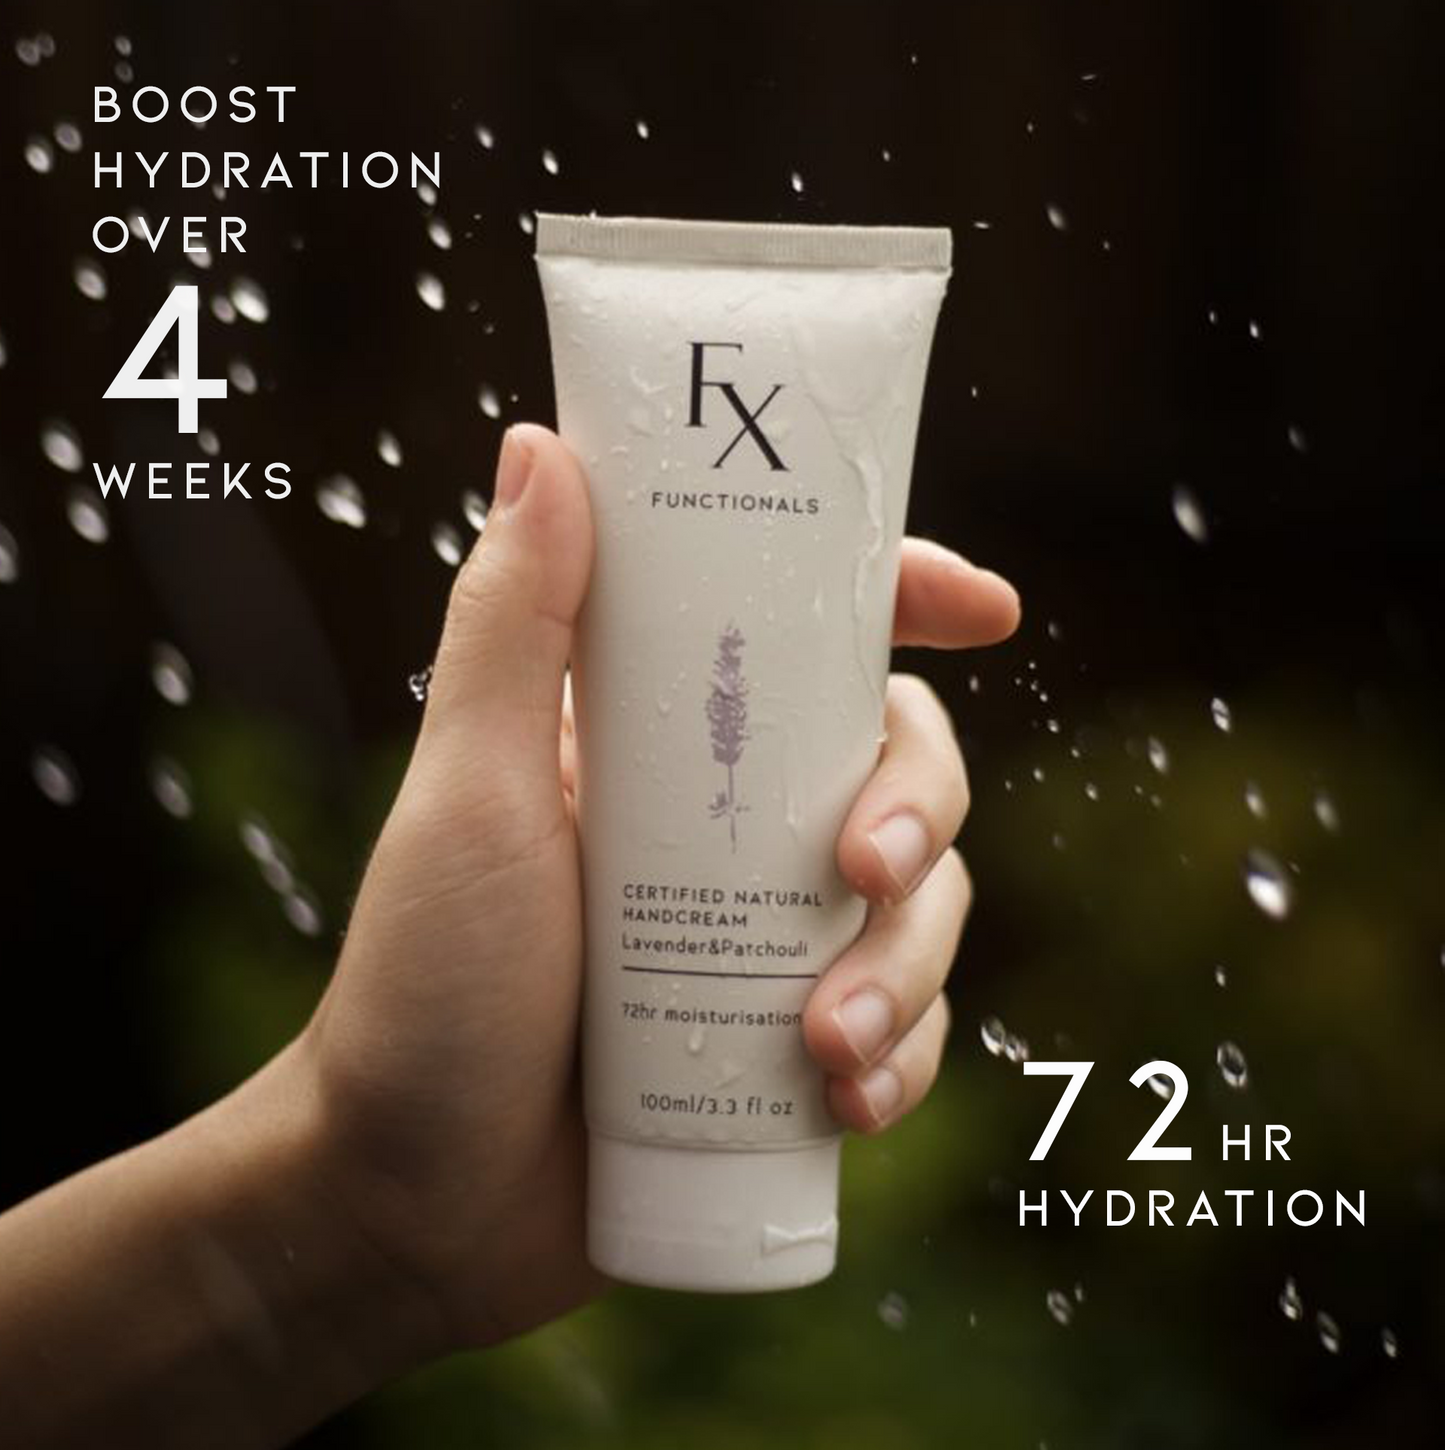 Functionals Certified Natural Handcream bottle in hand with water droplets in background